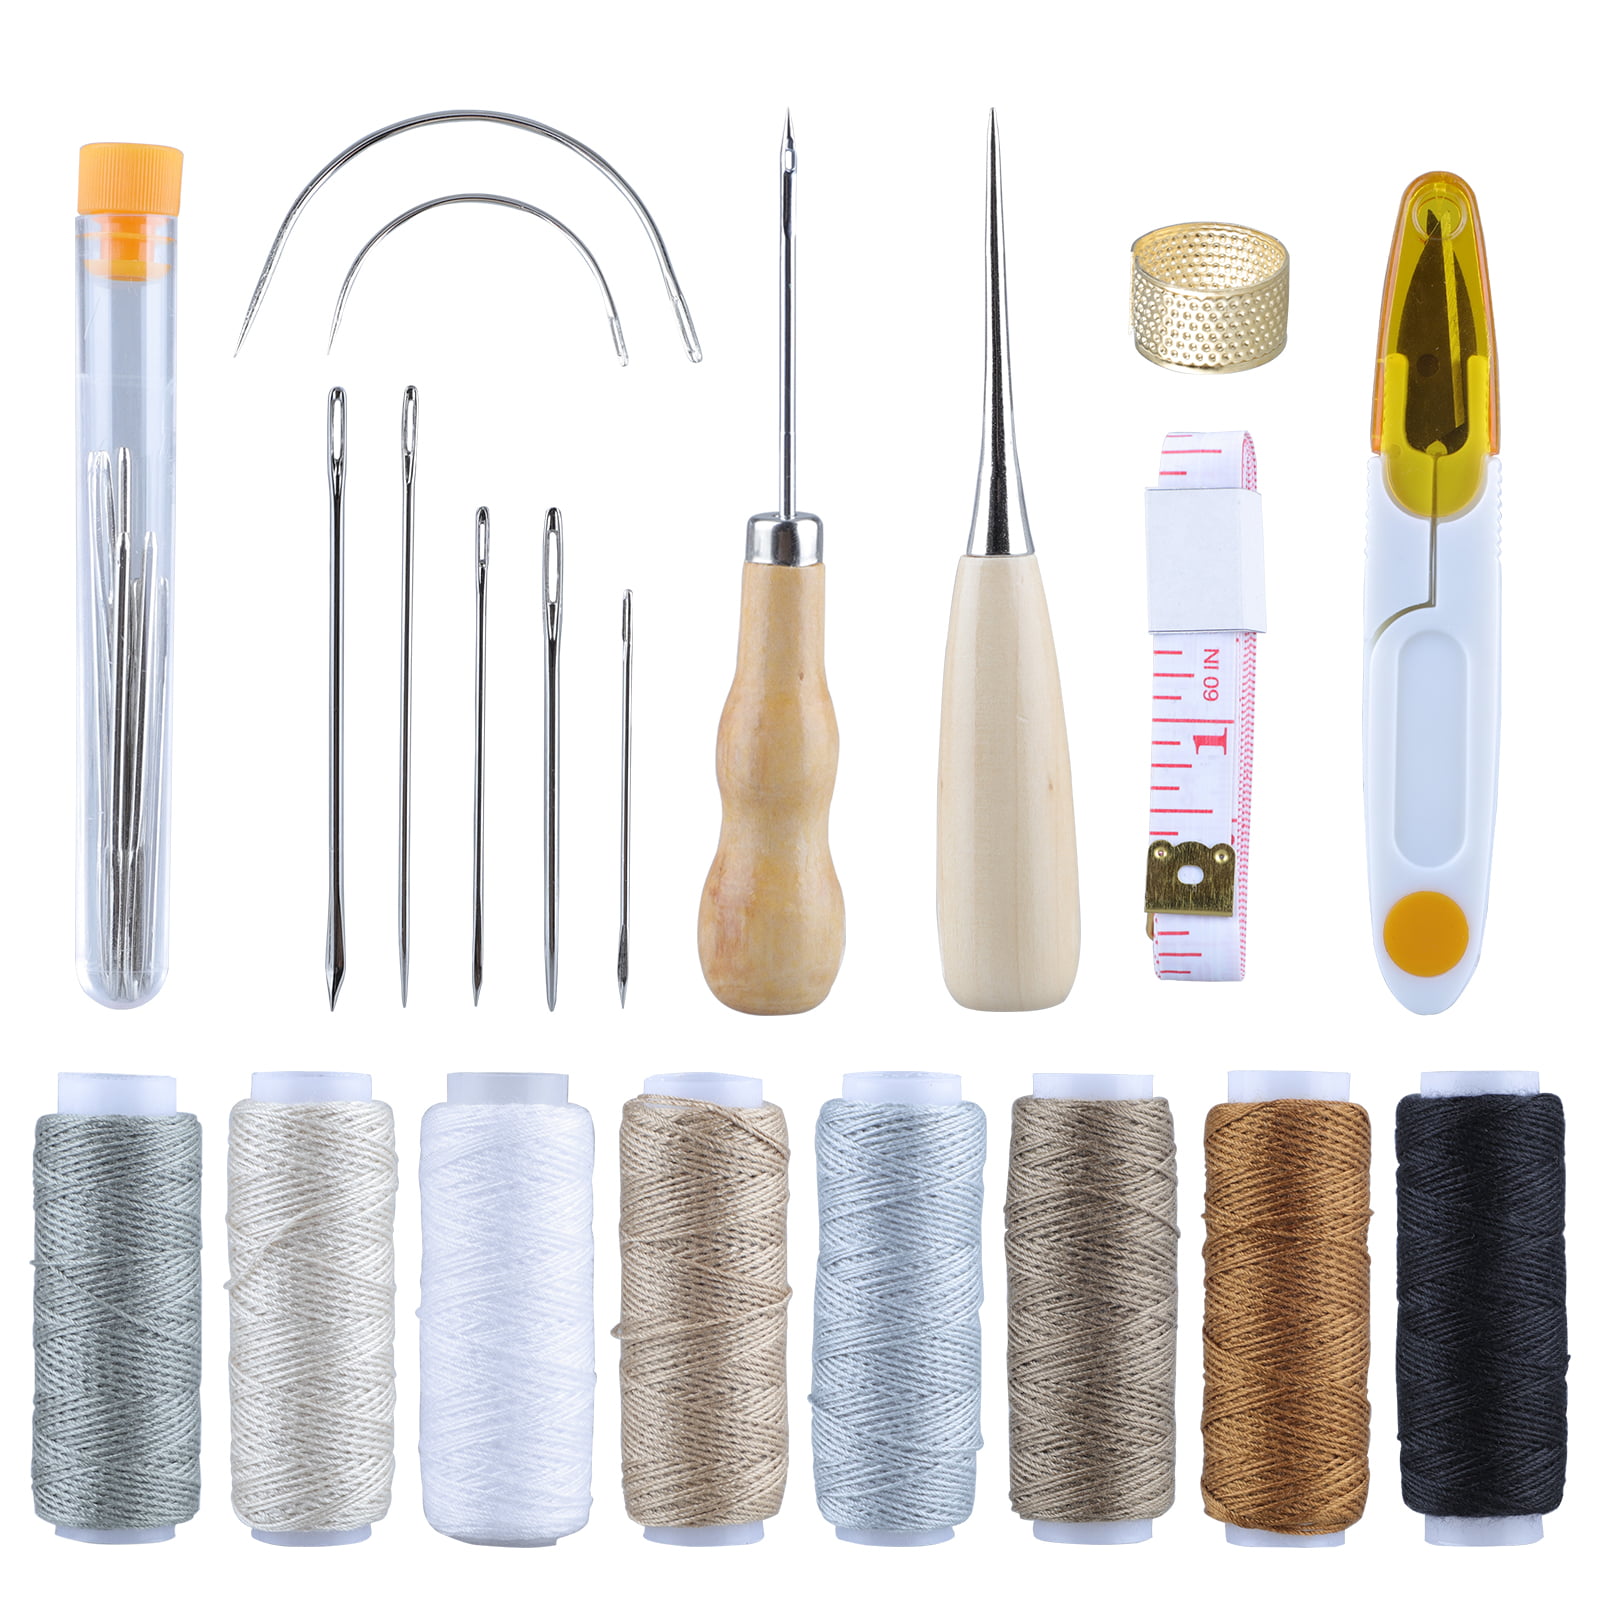 Leather Craft Sewing Tools Kit with Stitching Needle Waxed Thread Awl for Repair 